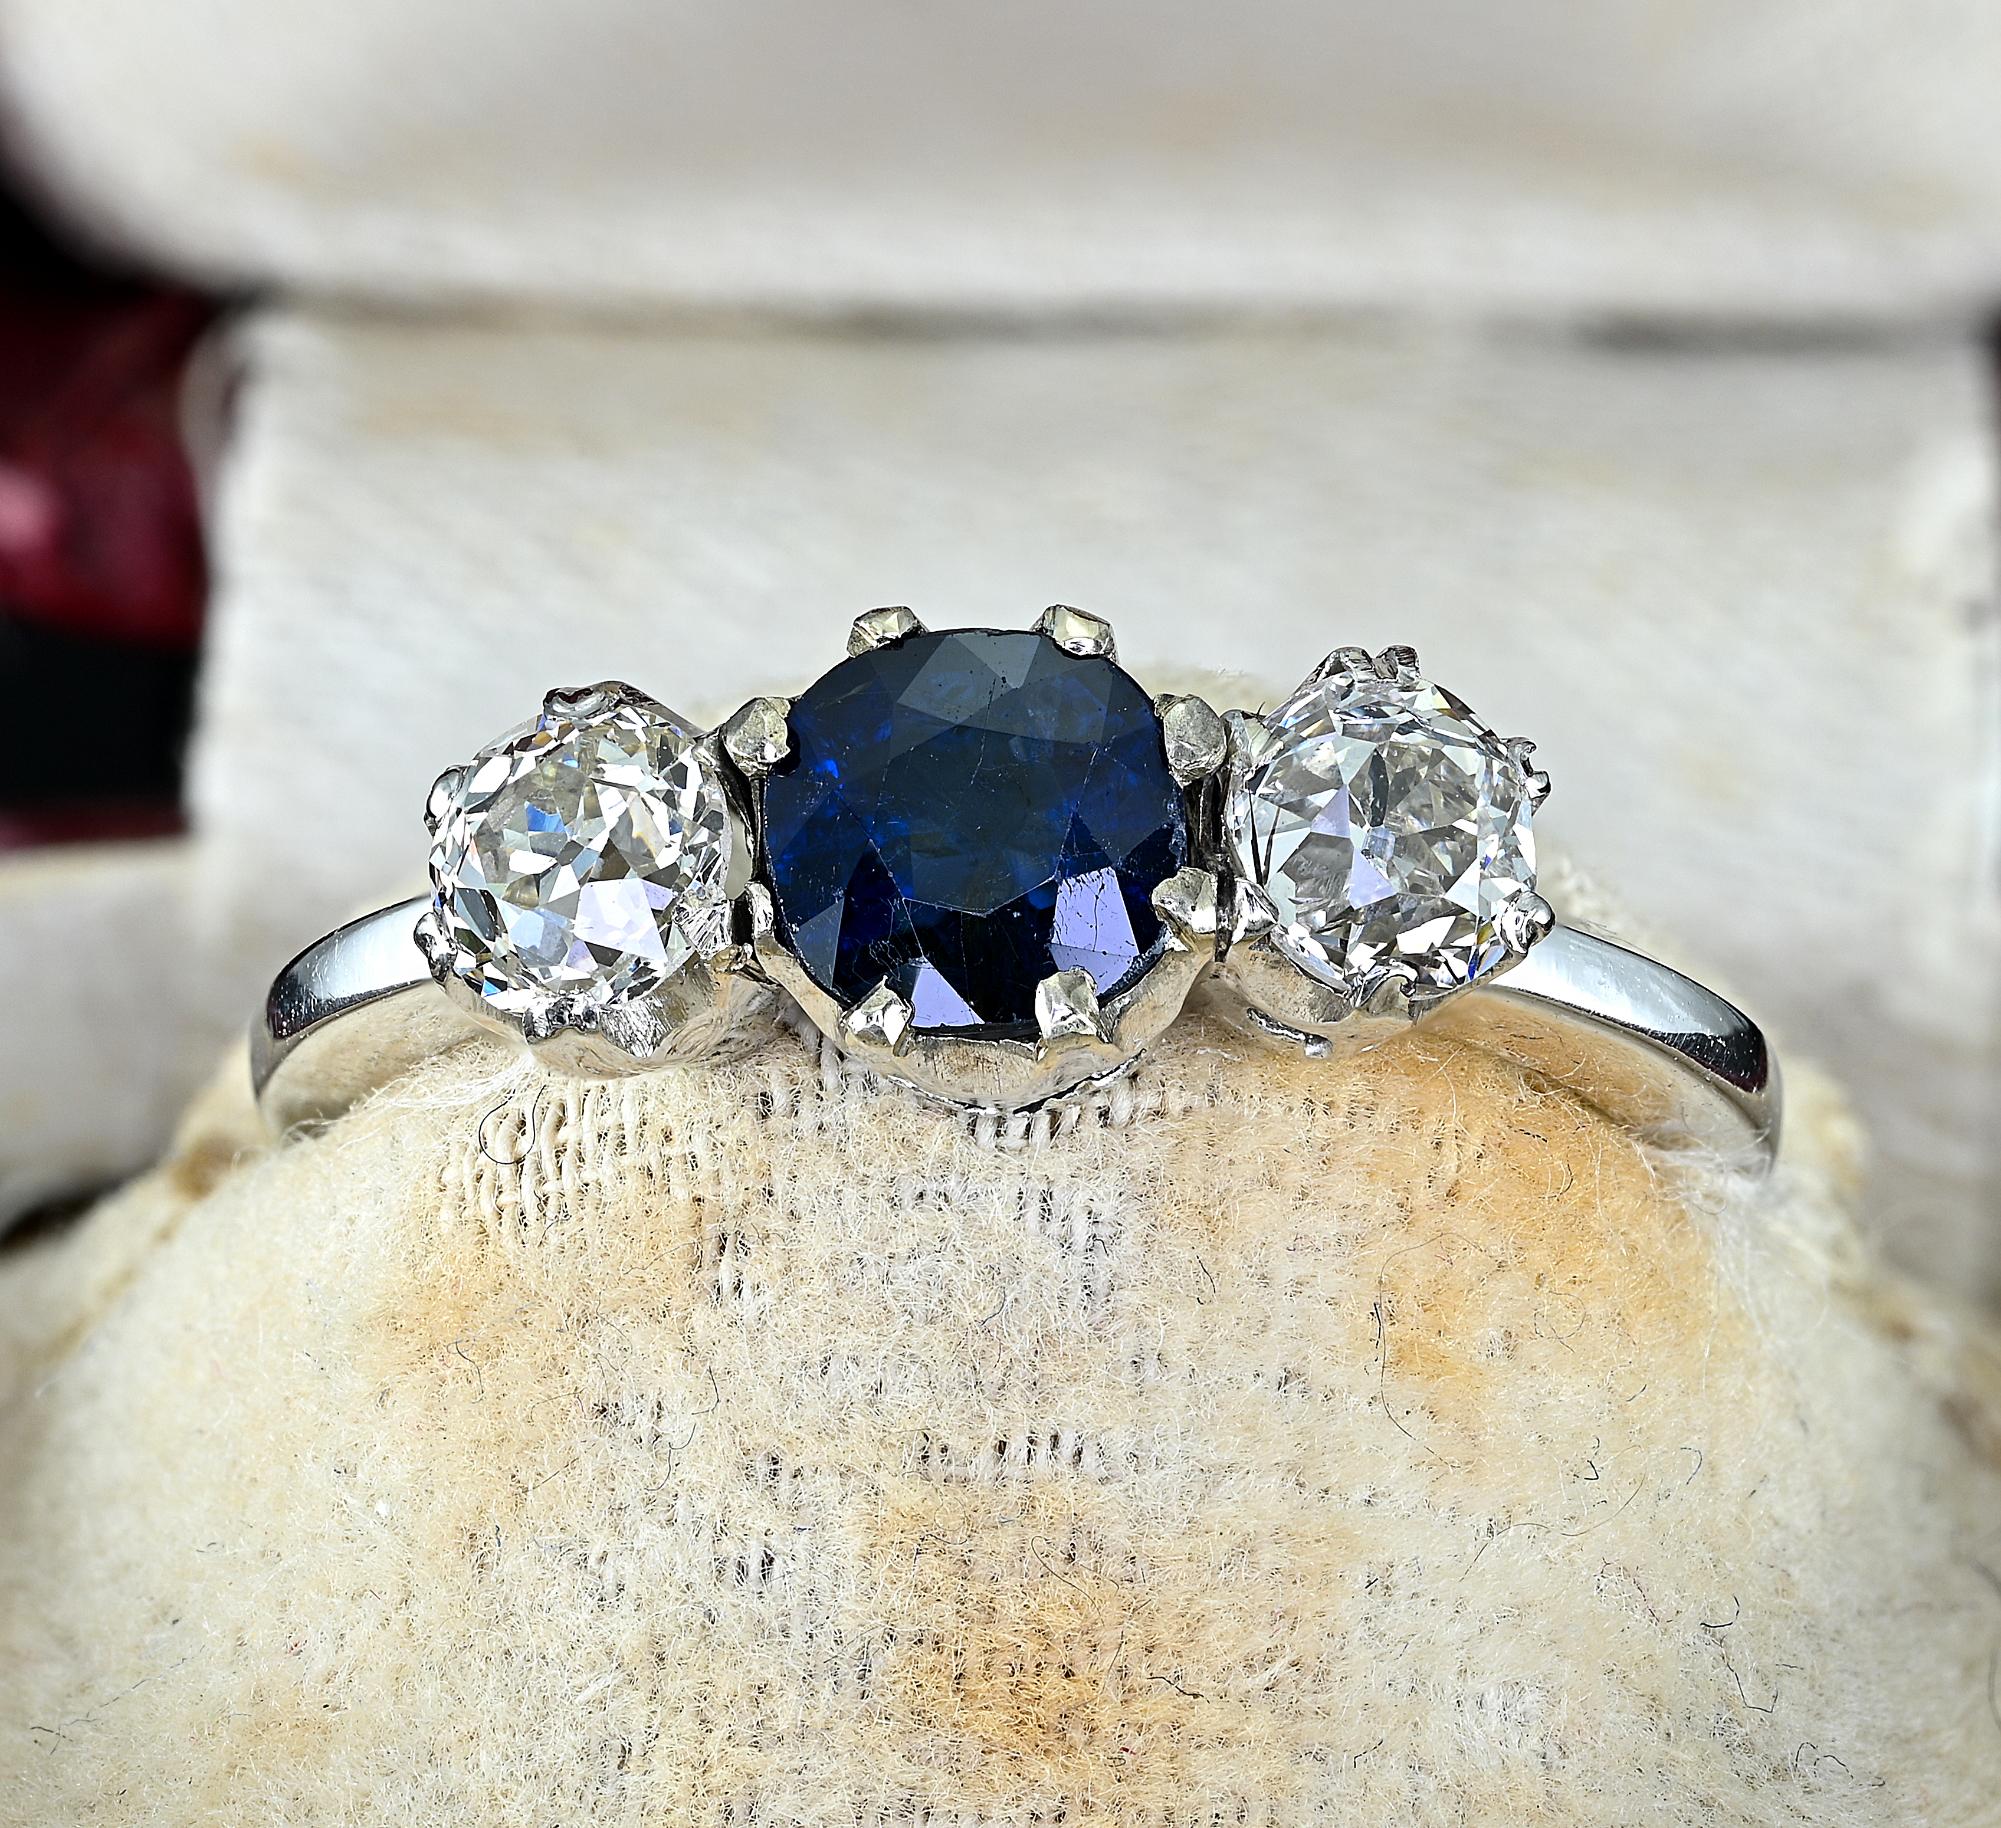 Antique Trilogy
Gorgeous, meaningful Trilogy ring from the Art Deco period 1925 ca
Hand crafted mounting made to exalt each one of the gemstone set on it – made of solid 18 KT white gold – marked
Centrally set with a cushion cut natural intense blue